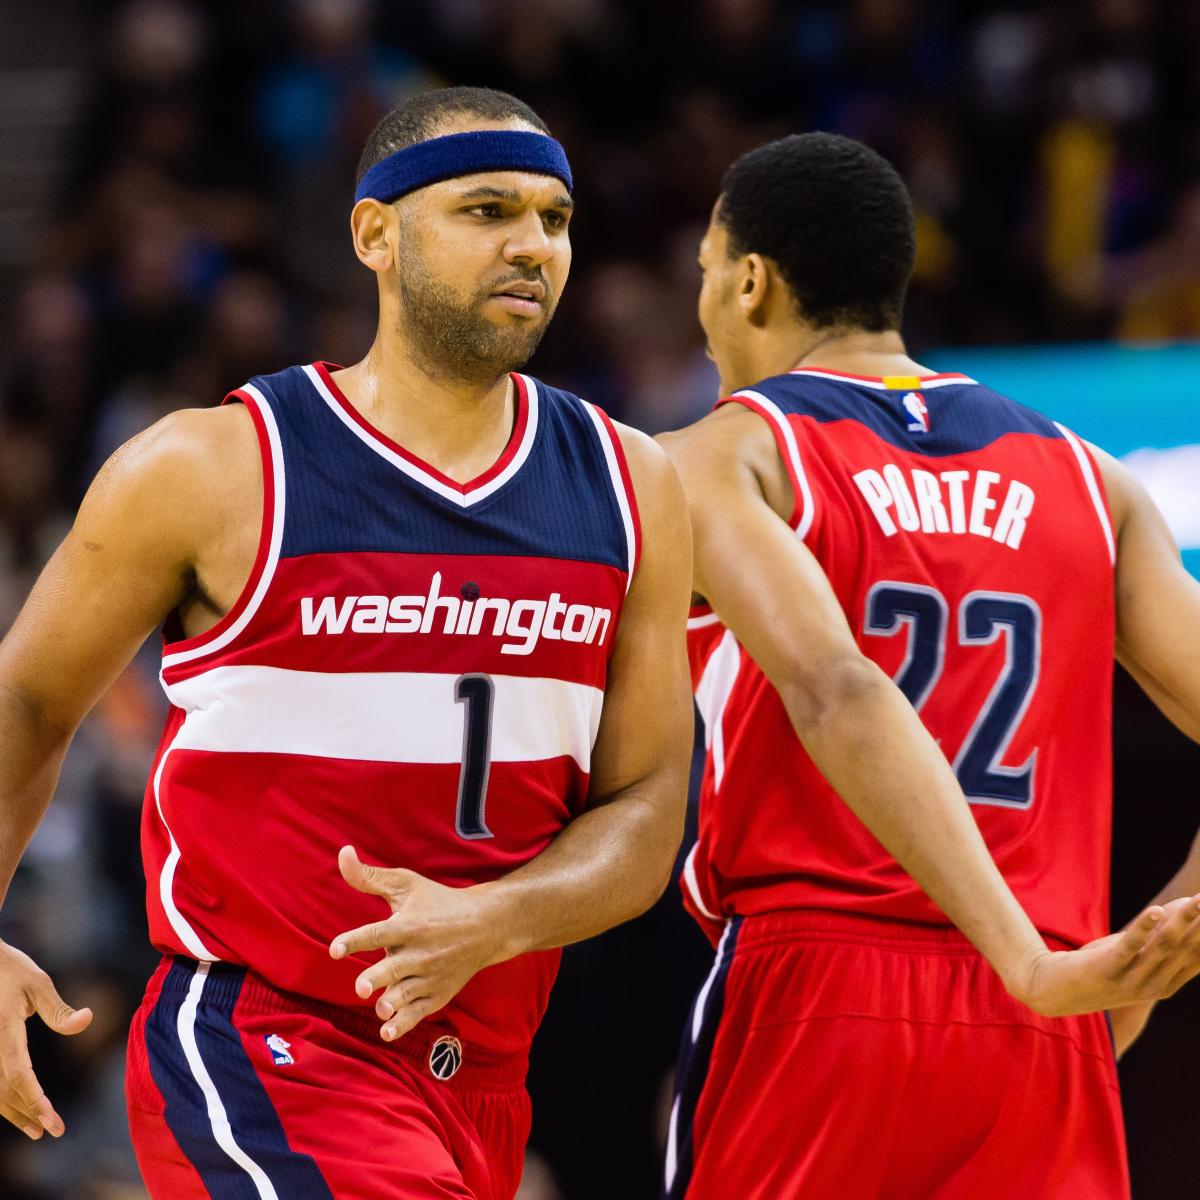 This was our best chance to win': Jared Dudley on a truly strange